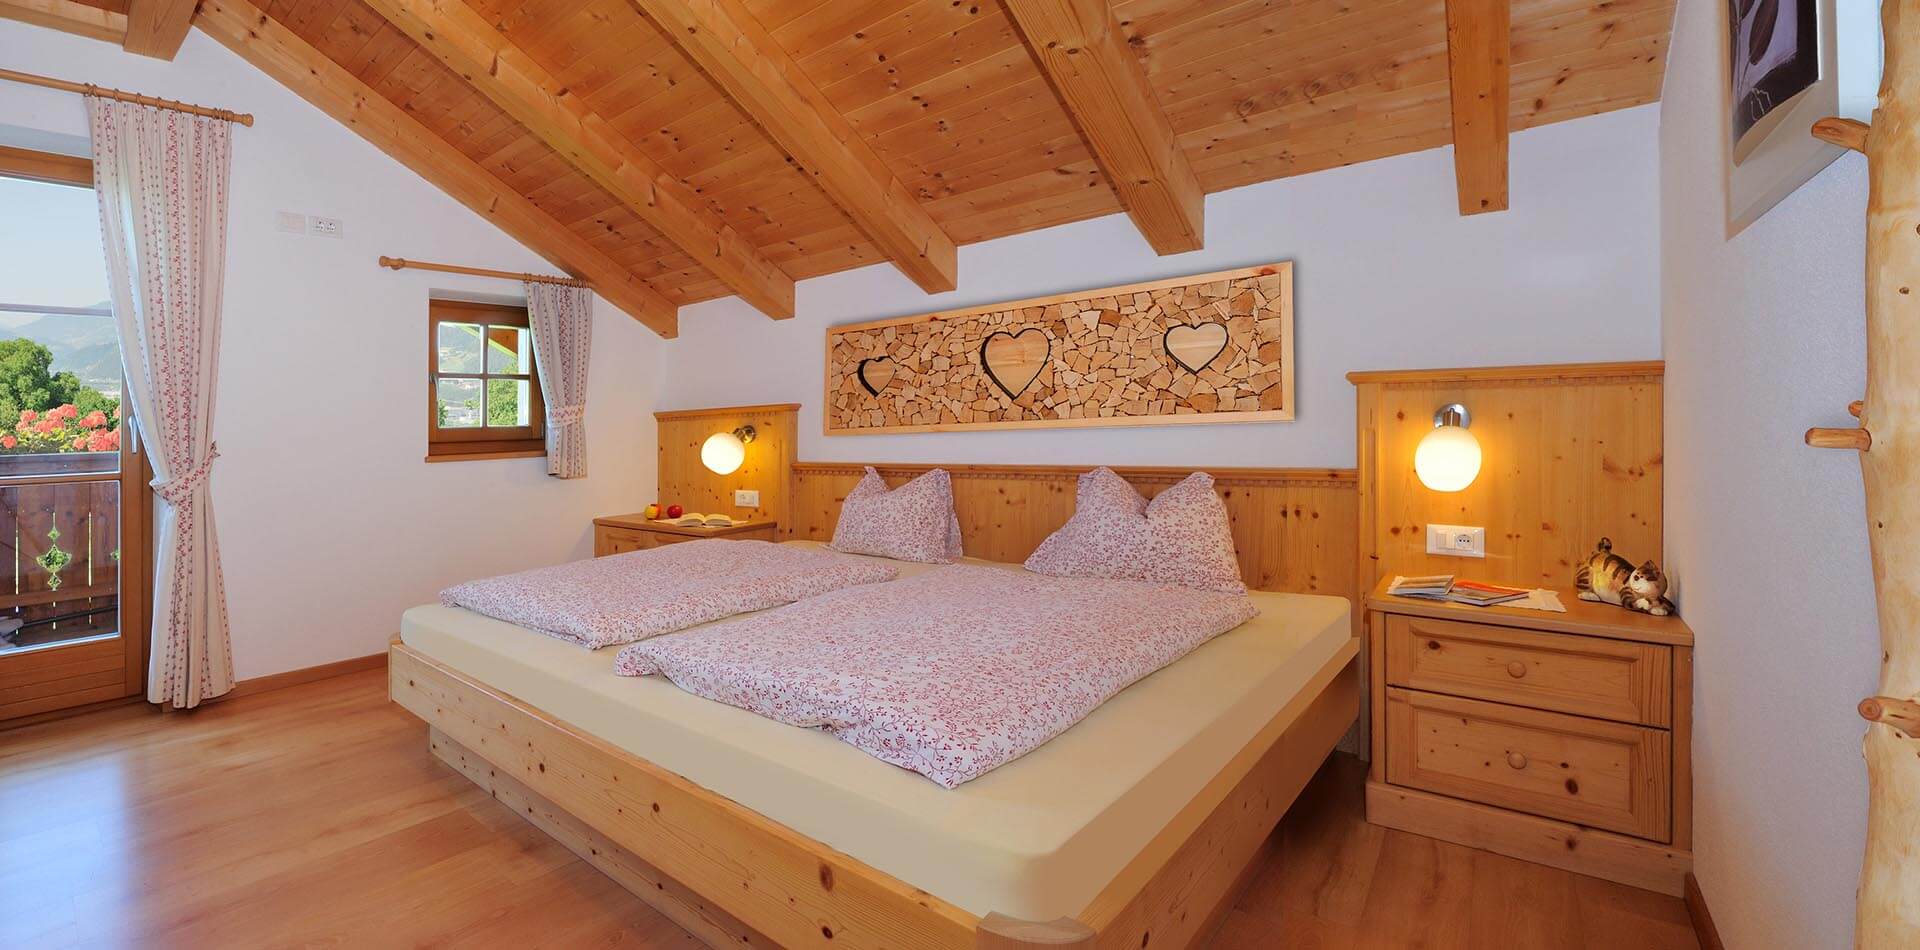 Holiday apartments bressanone south tyrol